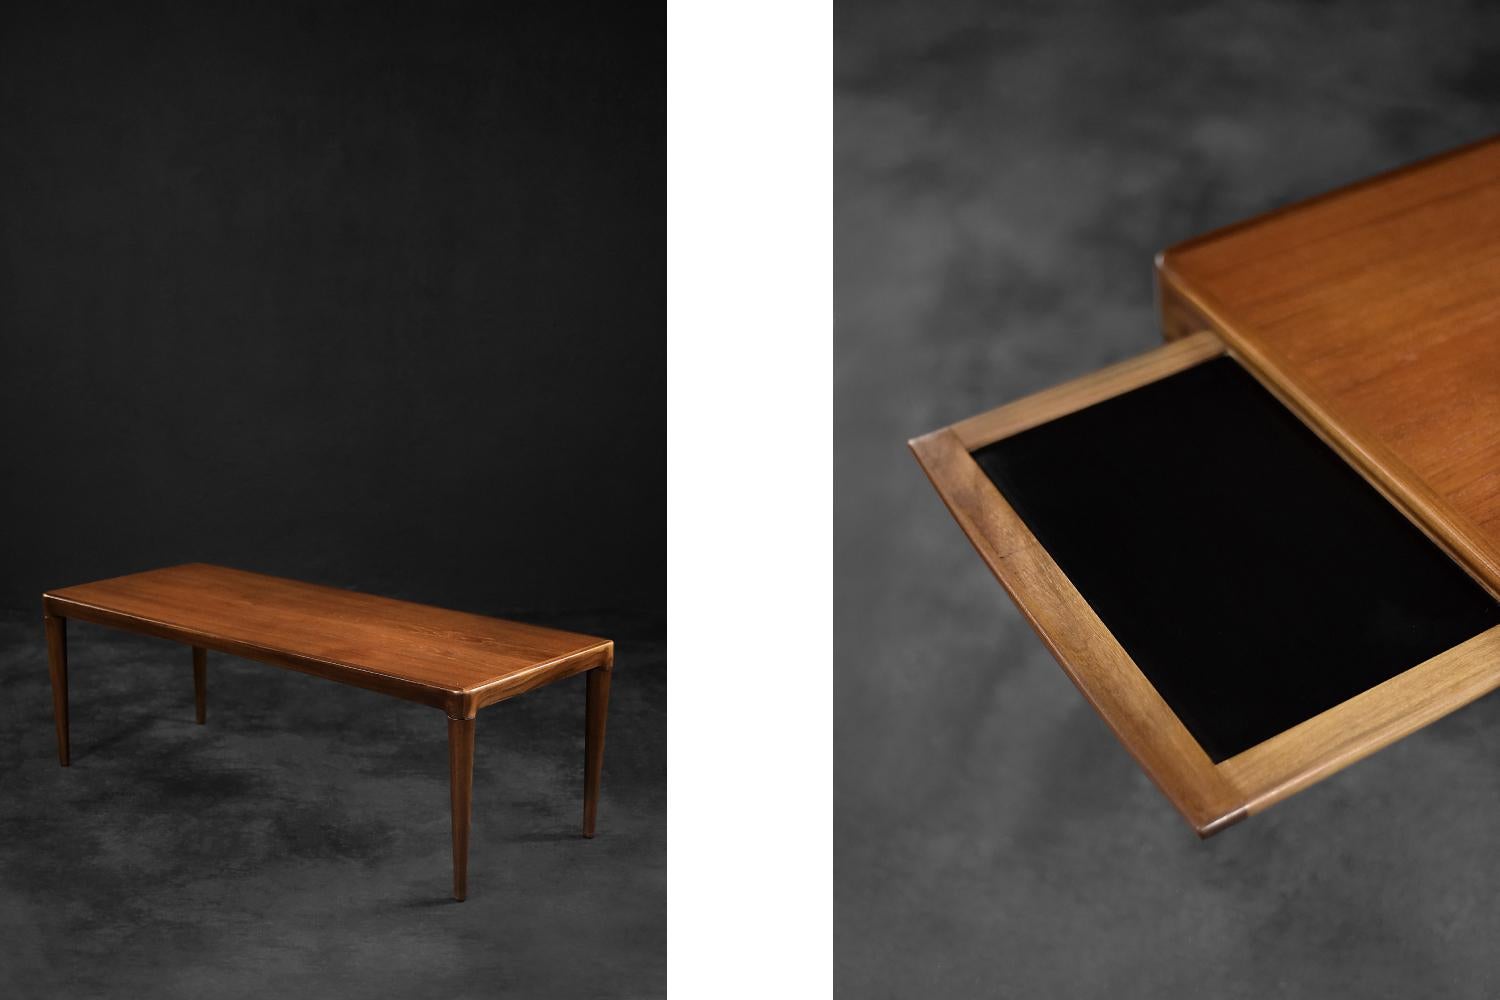 This classic low coffee table was made in Denmark during the 1960s. It is made of high-quality noble rosewood in a warm shade of brown. In contrast to the popular rosewood finishes - the offered table has regular and calm grain. The table has a pull